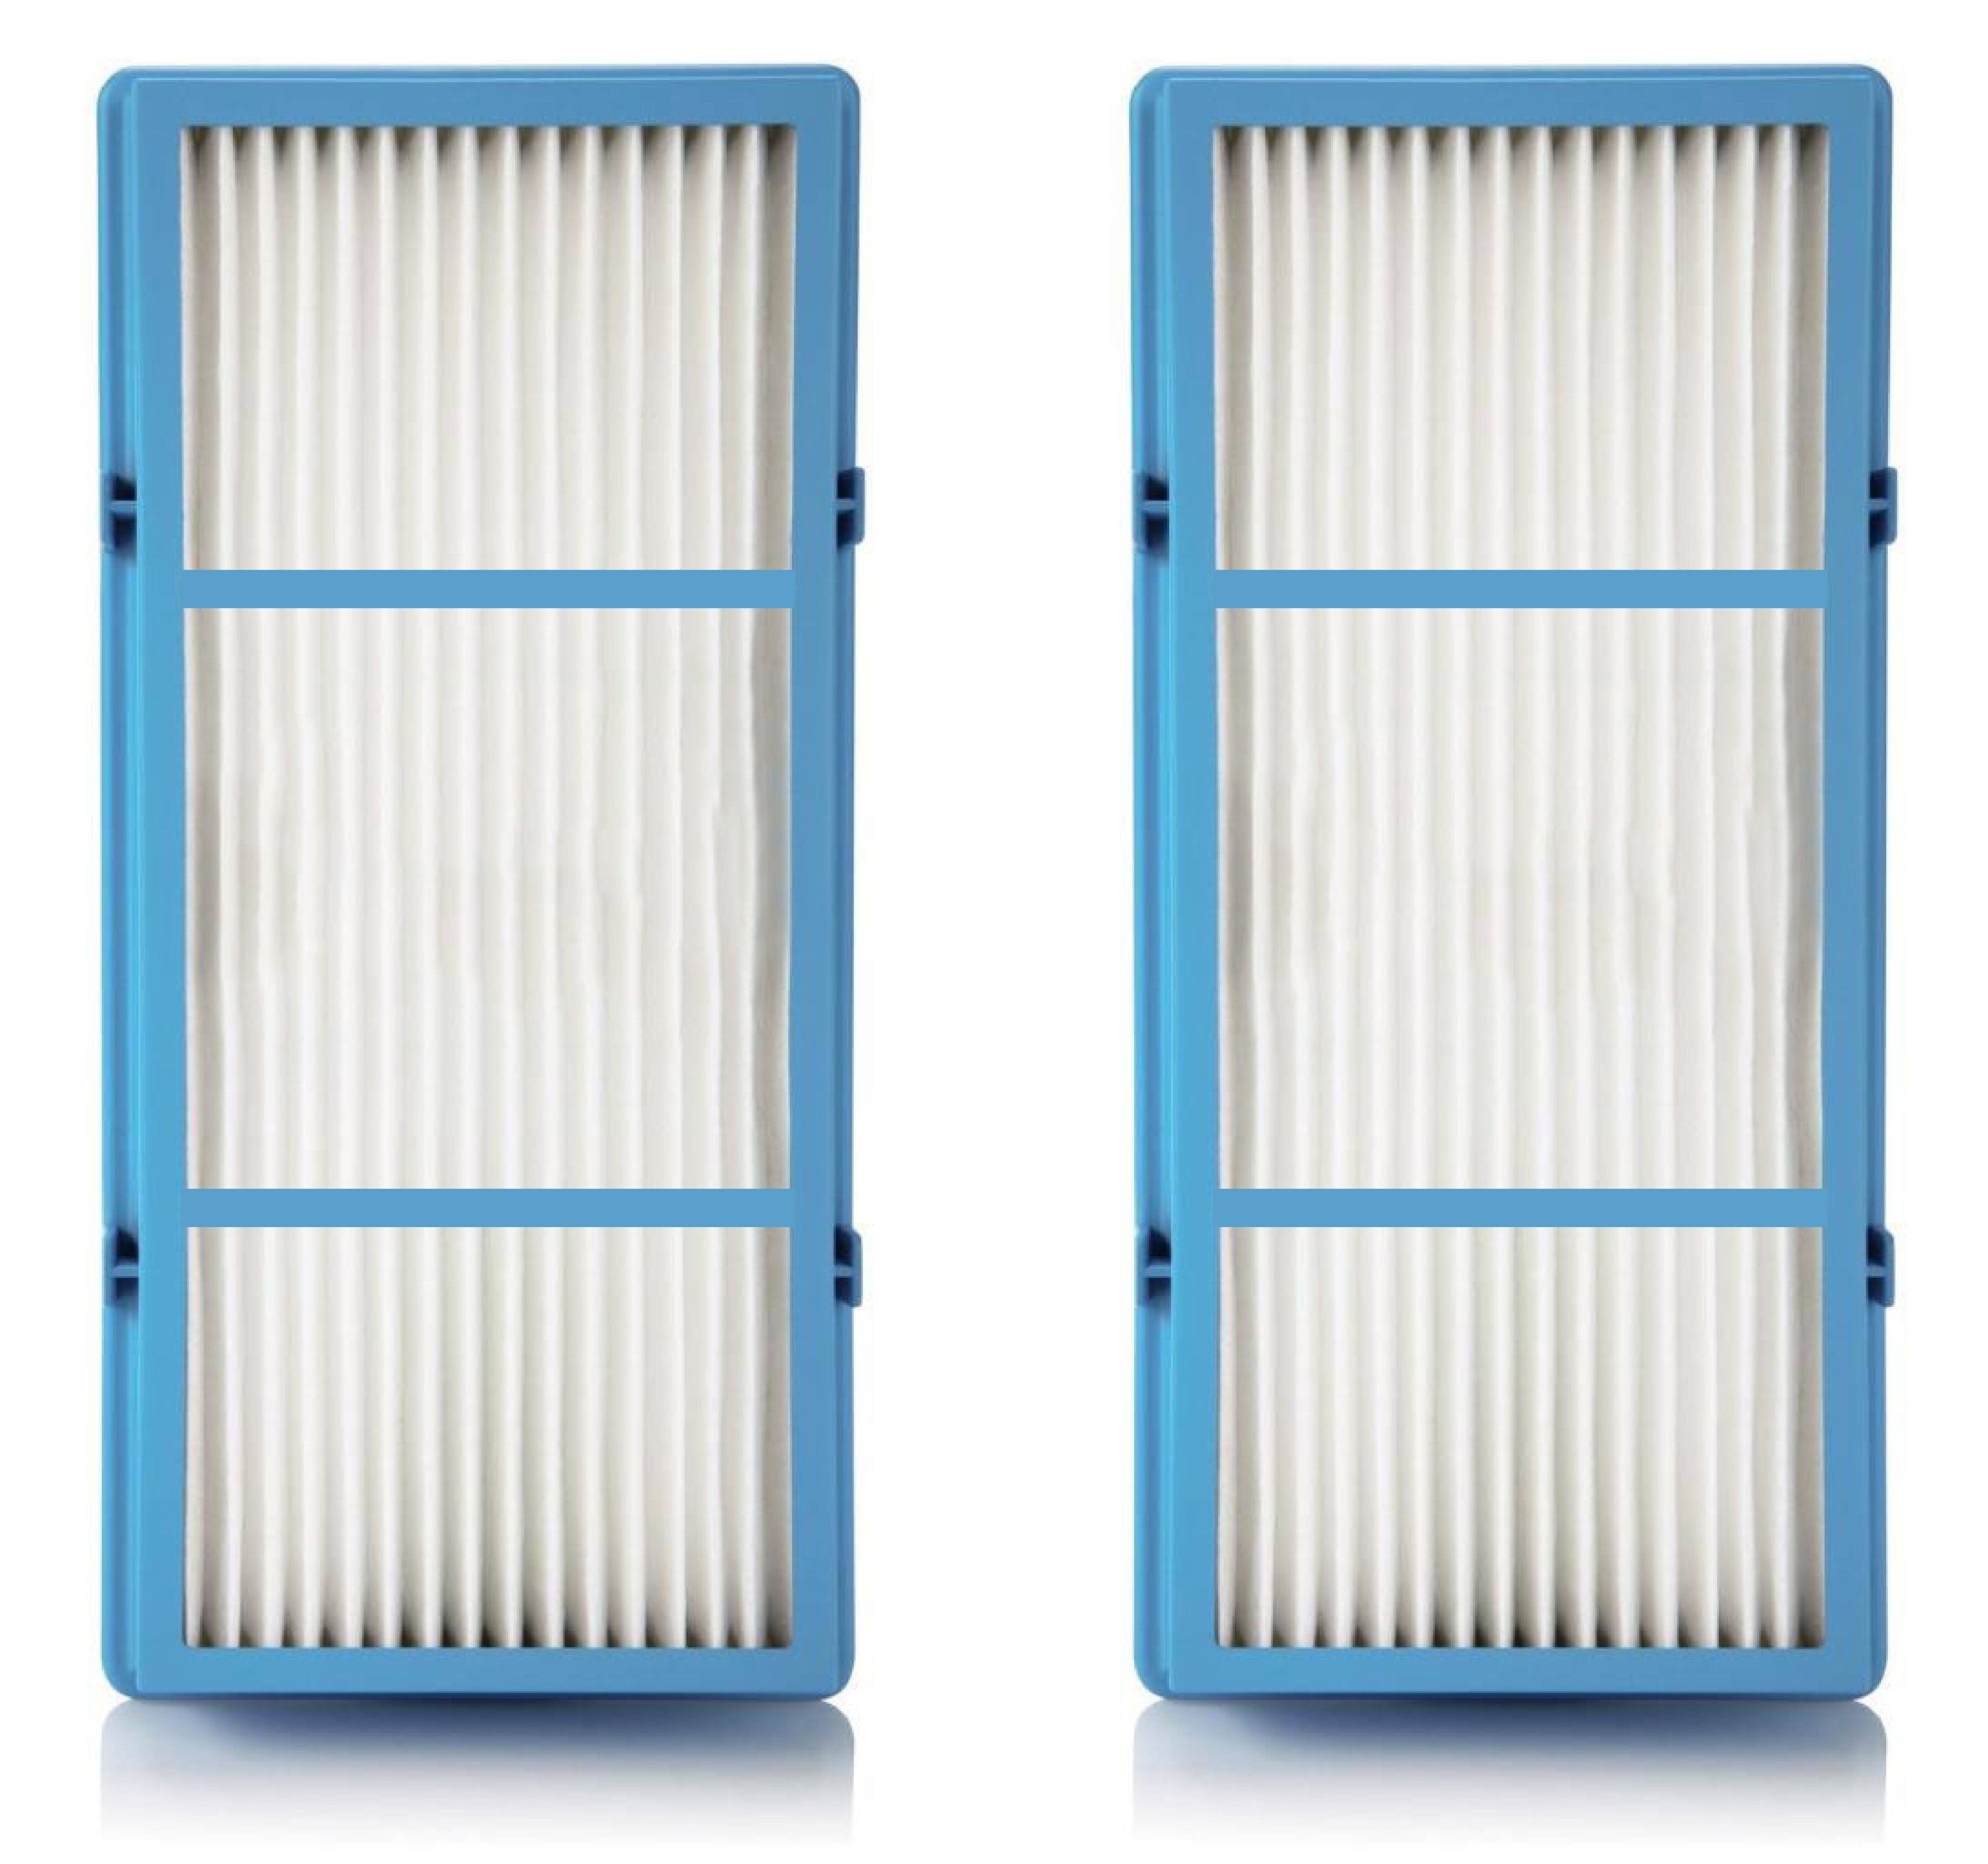 2x HEPA Total Air Cleanner Filter Replace for Holmes AER1 Purifier HAP242-NUC US 